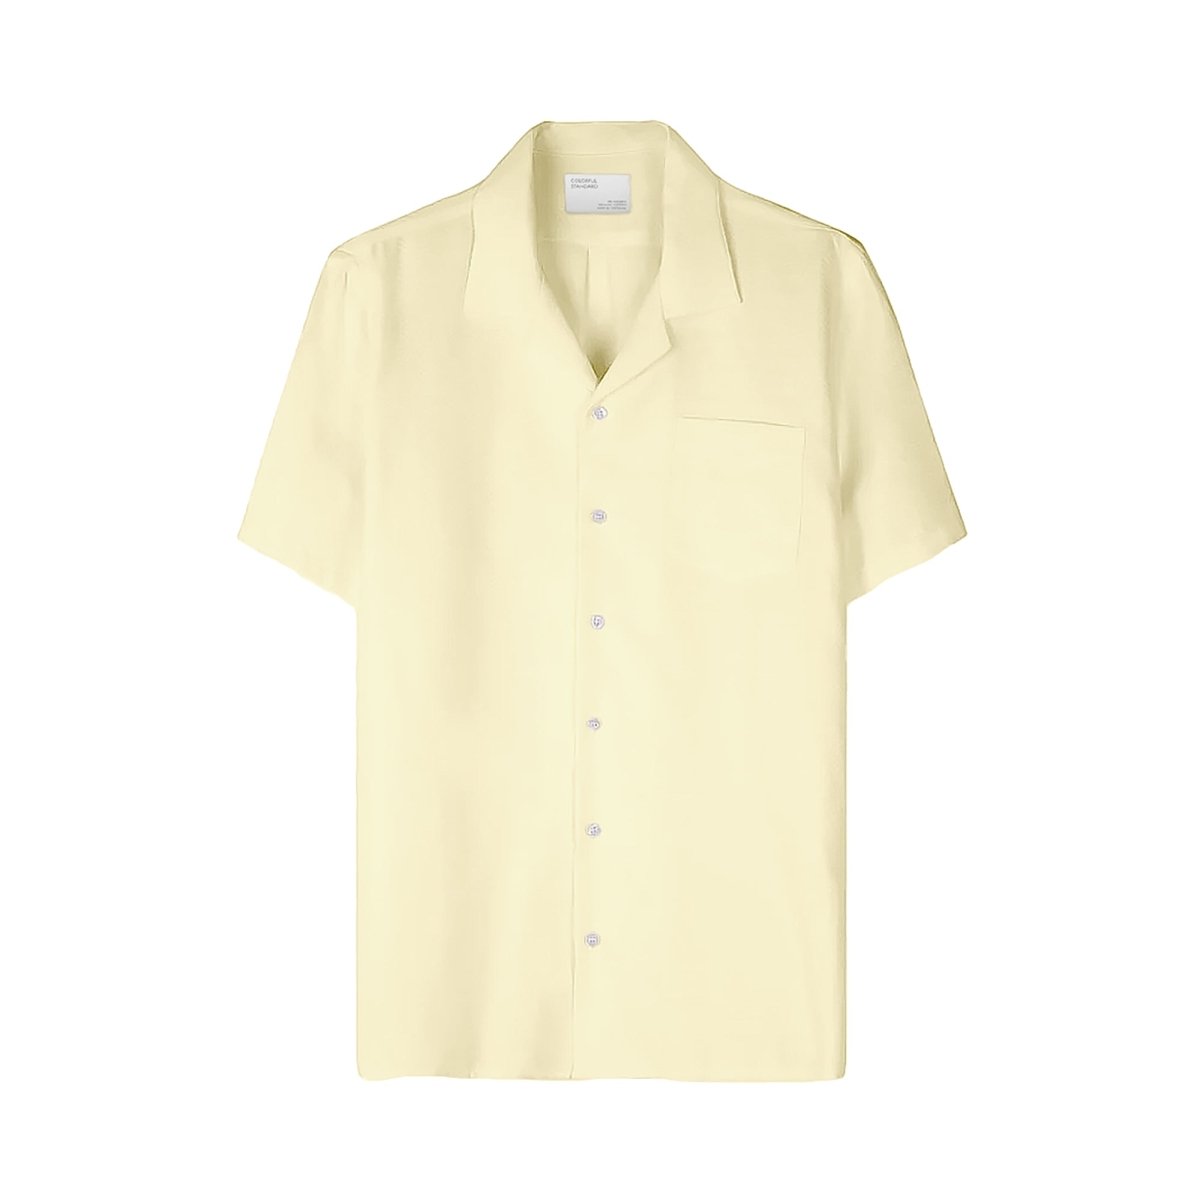 Colorful Linen Short Shirt Soft Yellow - KYOTO - Colorful Standard